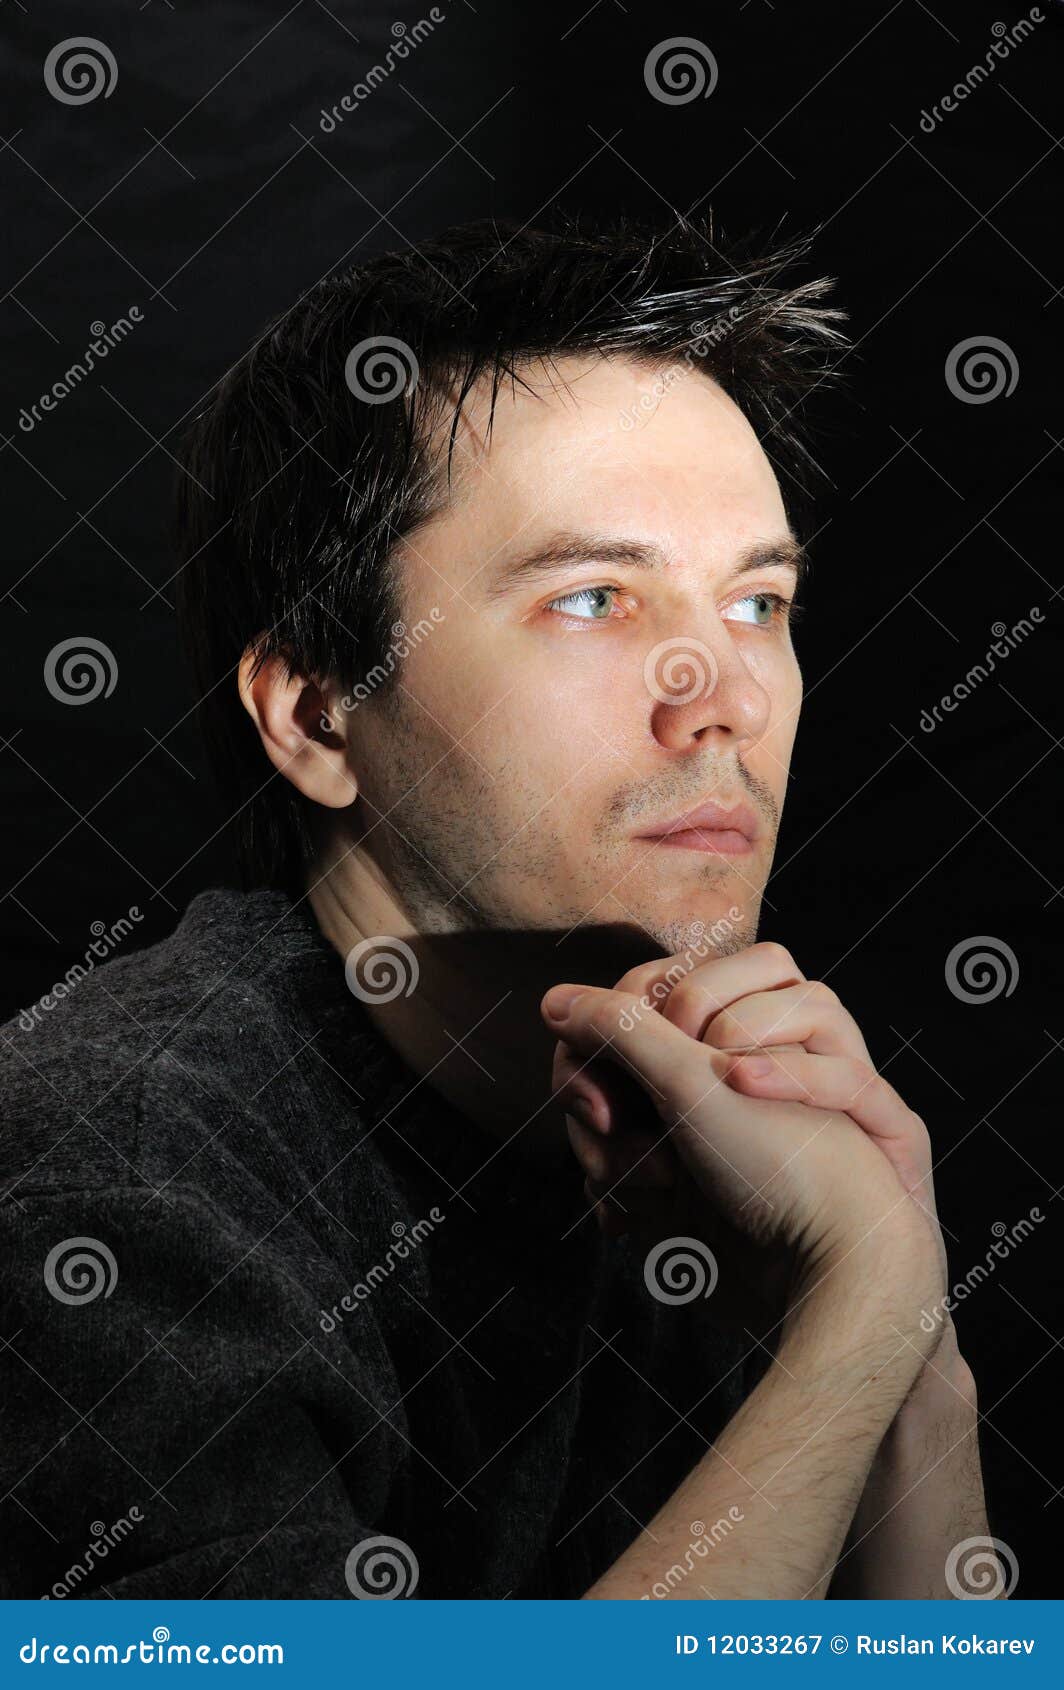 Thoughtful Man. Royalty Free Stock Photography - Image: 12033267